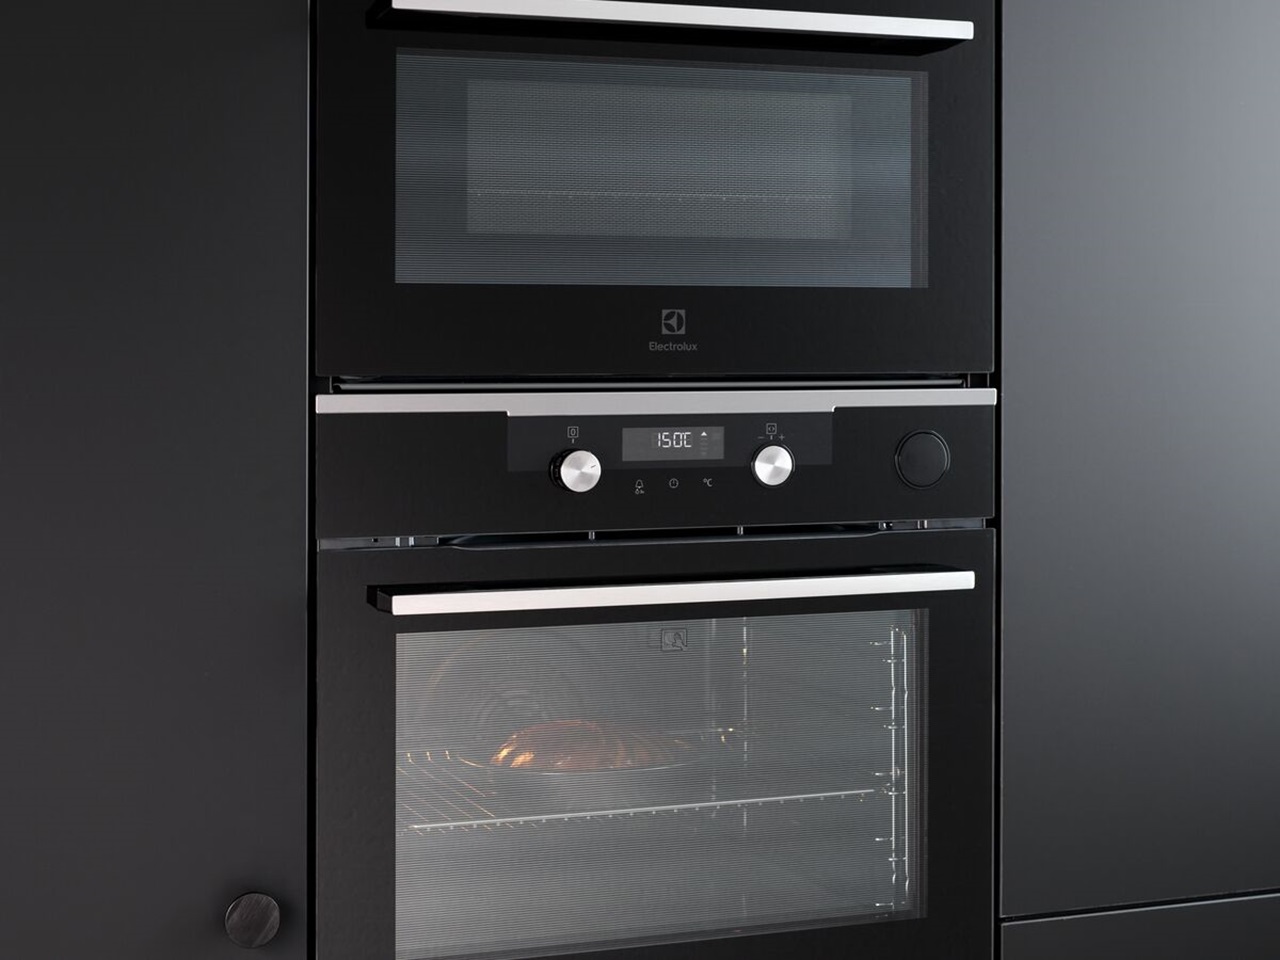 Built-in Electrolux steam-cleaning oven and microwave